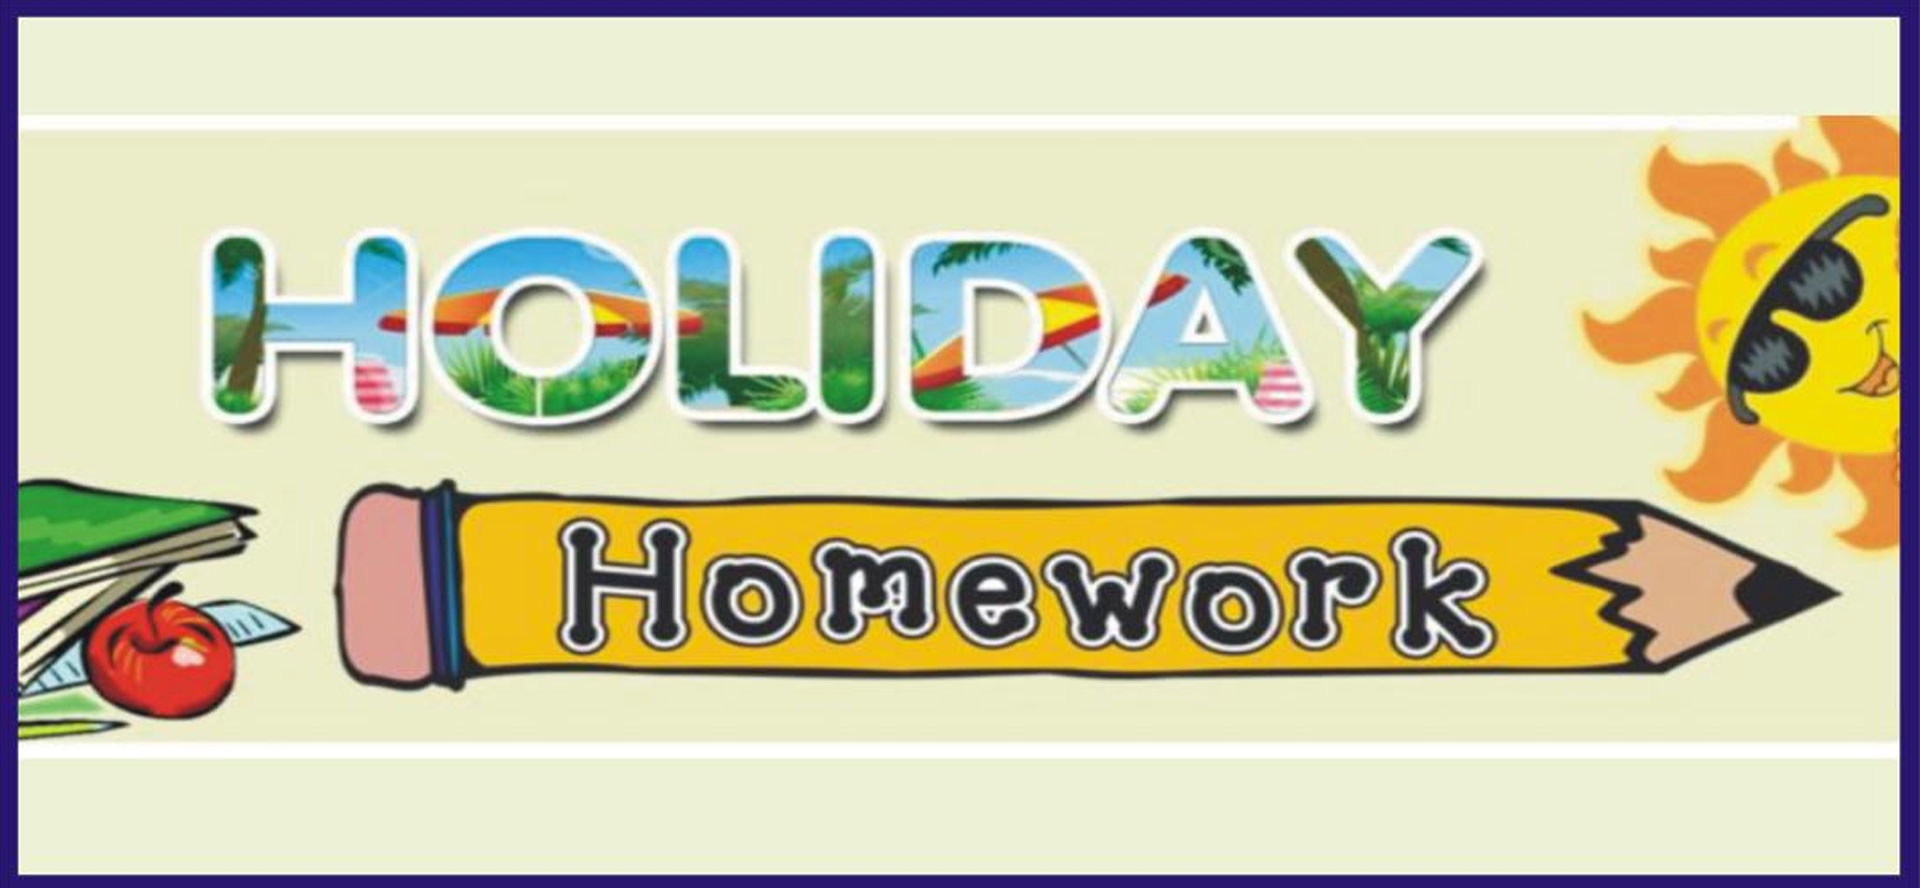 holiday homework or holidays homework which is correct